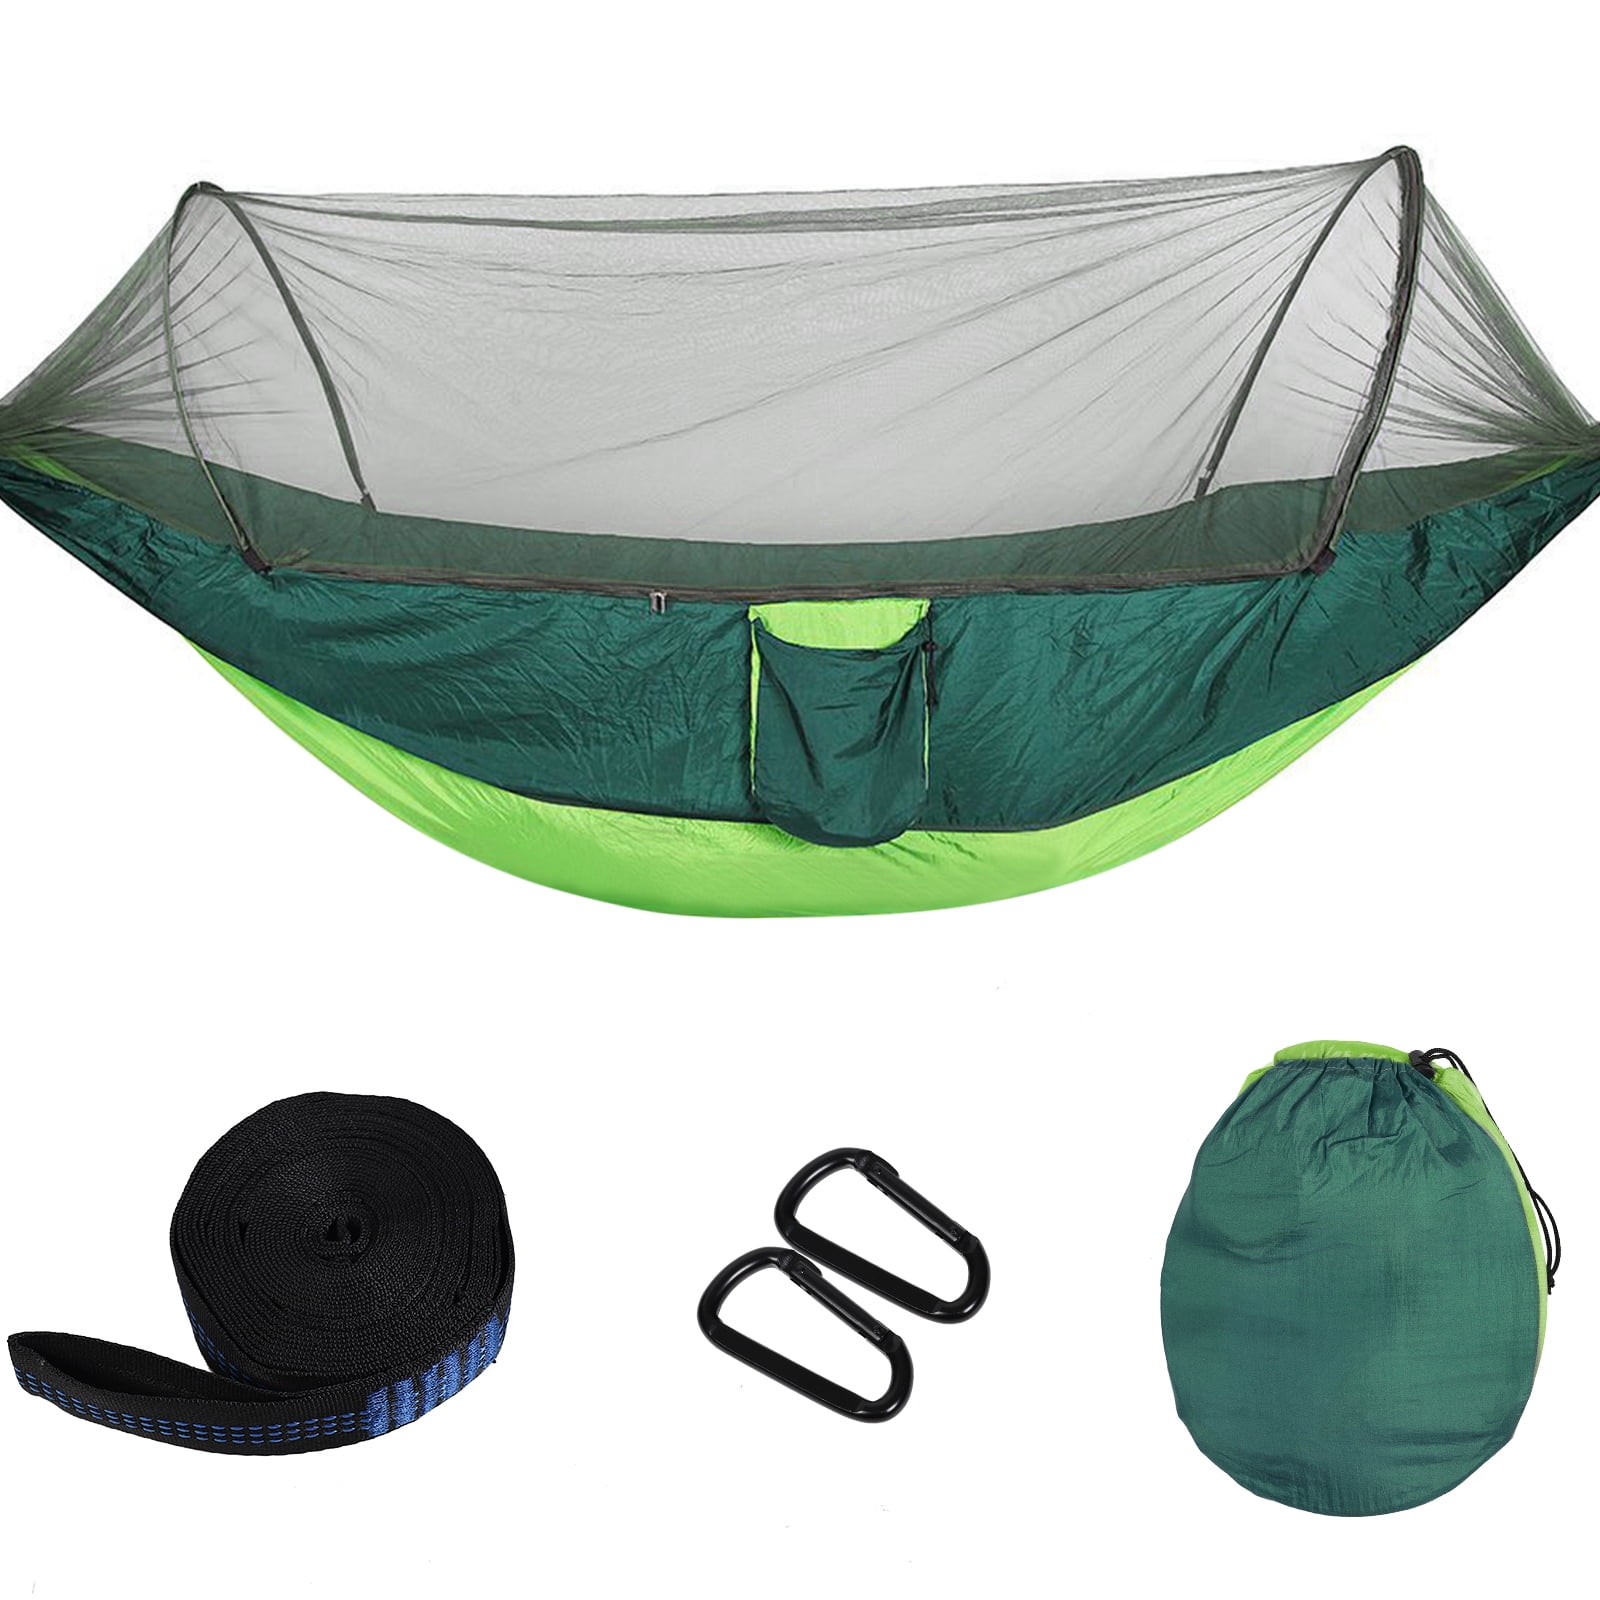 2 Person Anti-mosquito Insect Camping Tent Sleeping Net Outdoor Hiking 